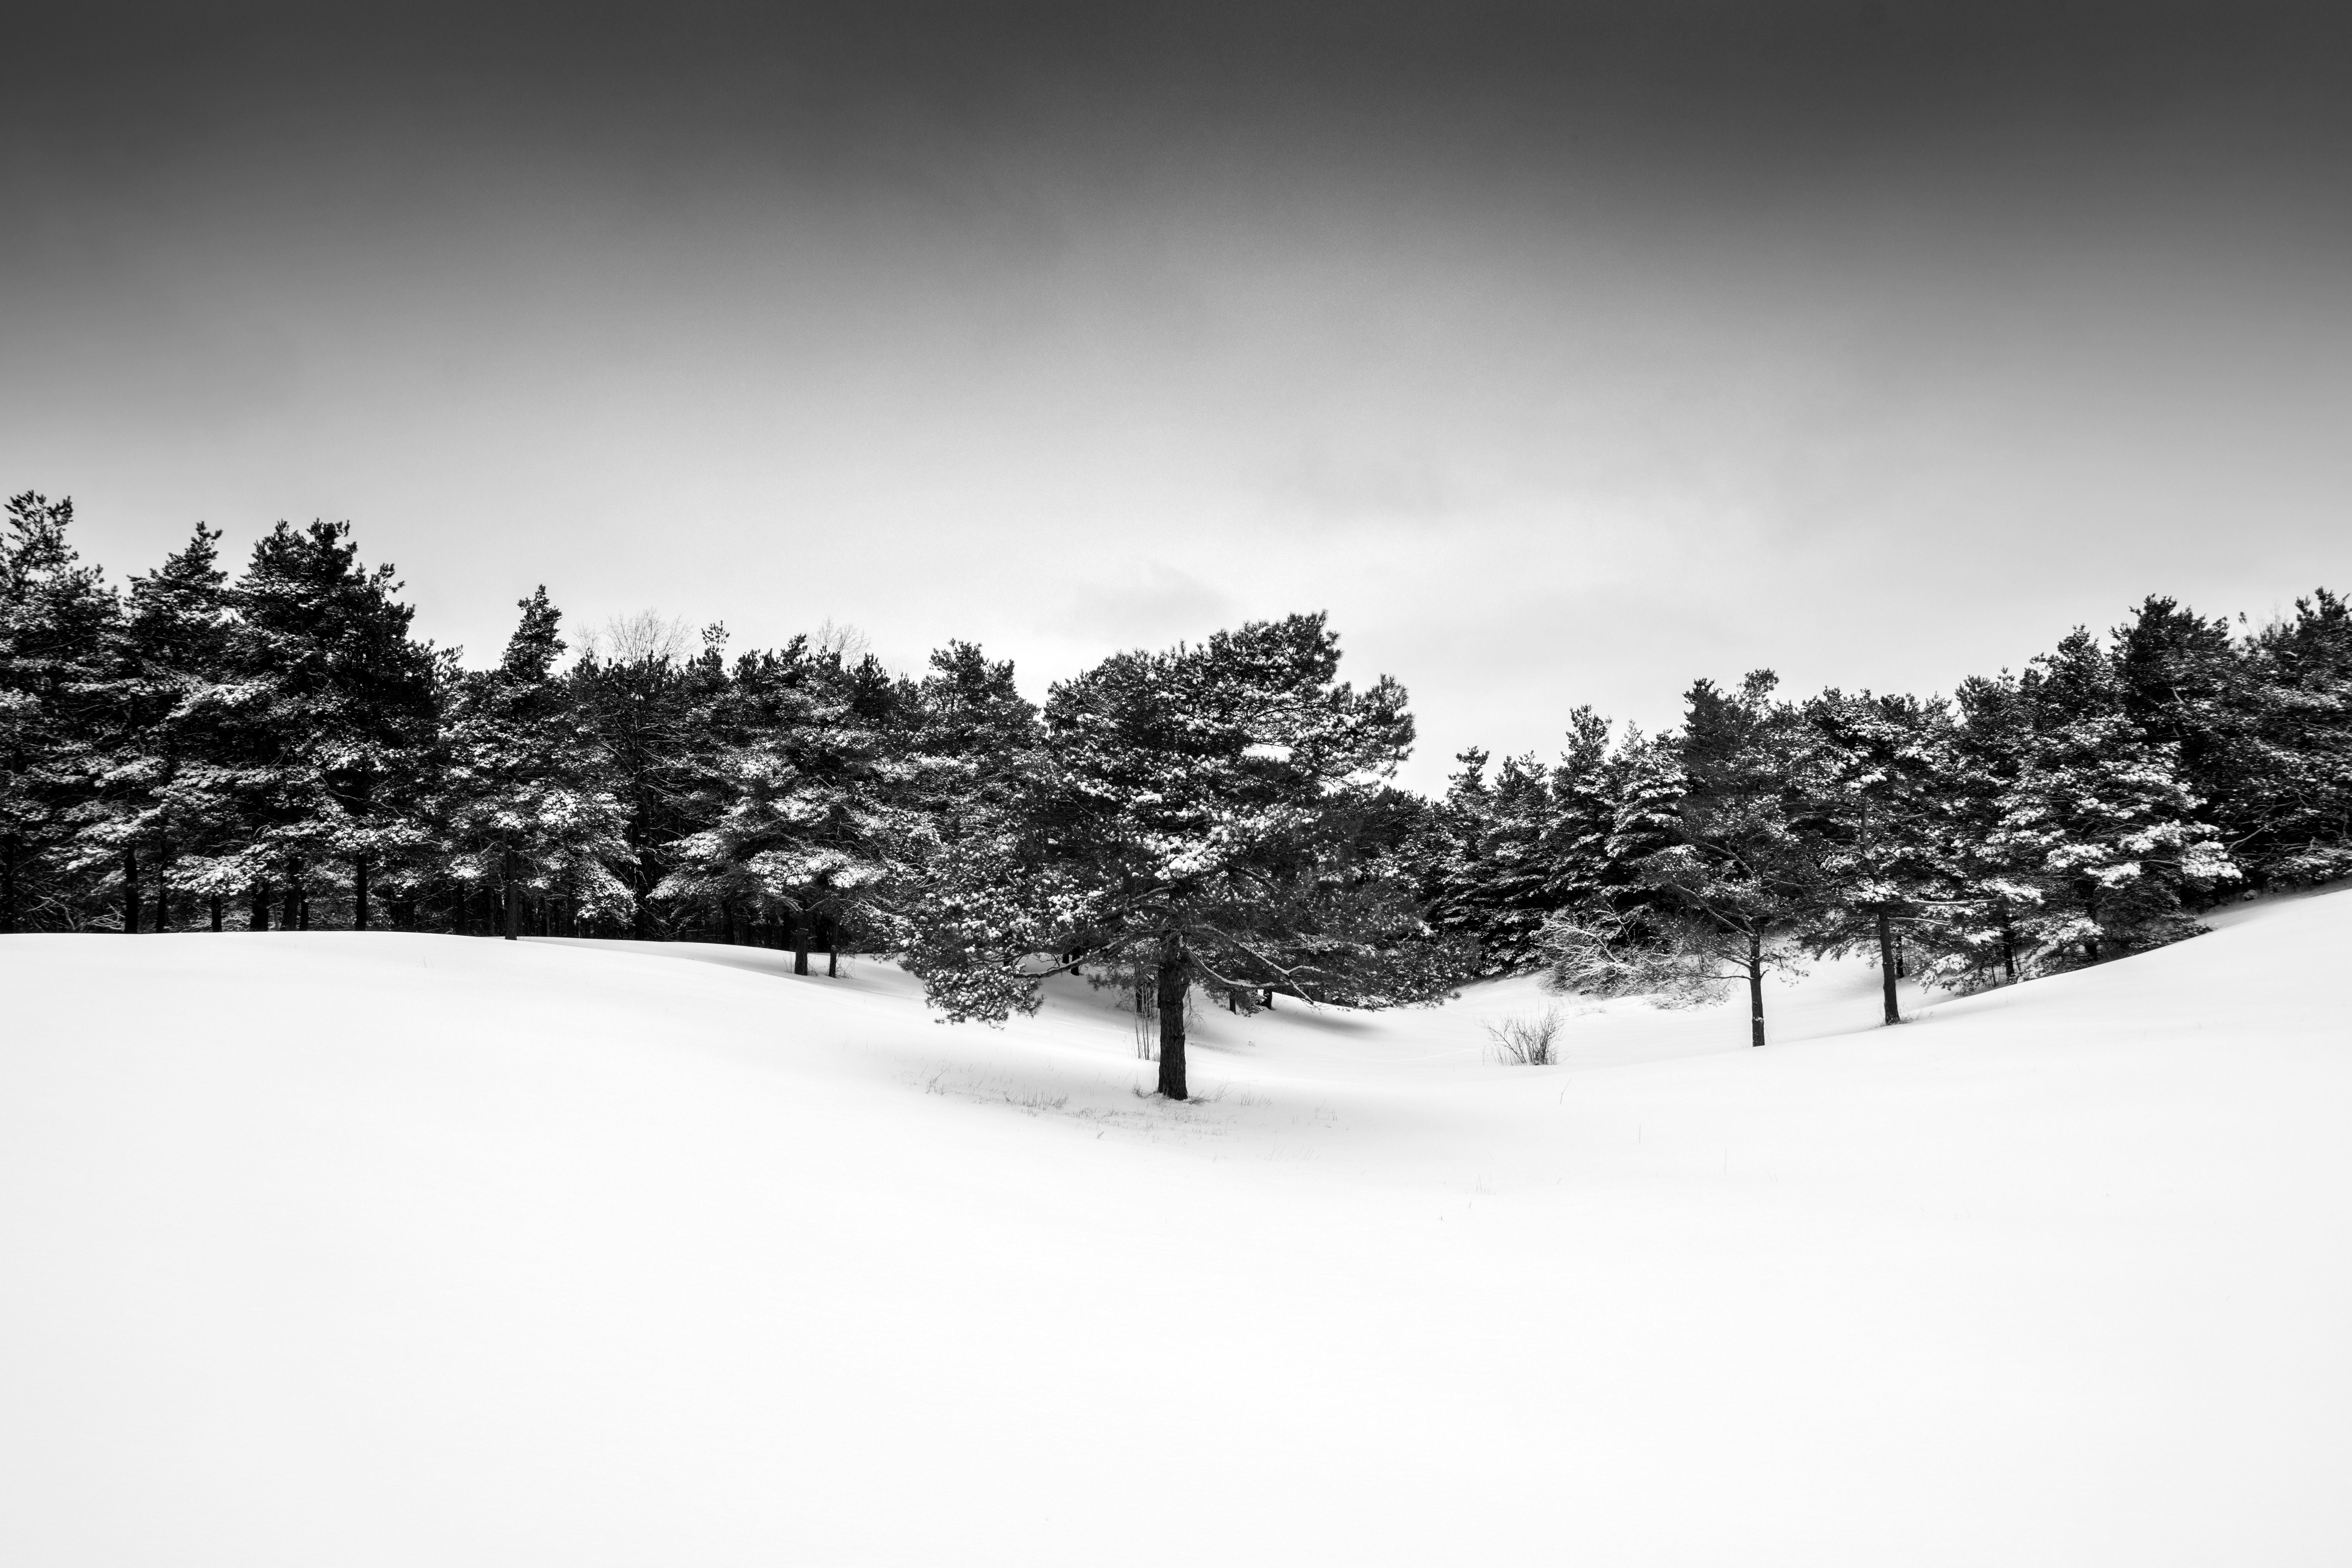 Rick Bogacz Black and White Photograph - "Line of Trees in Snowy Field", signed archival pigment print